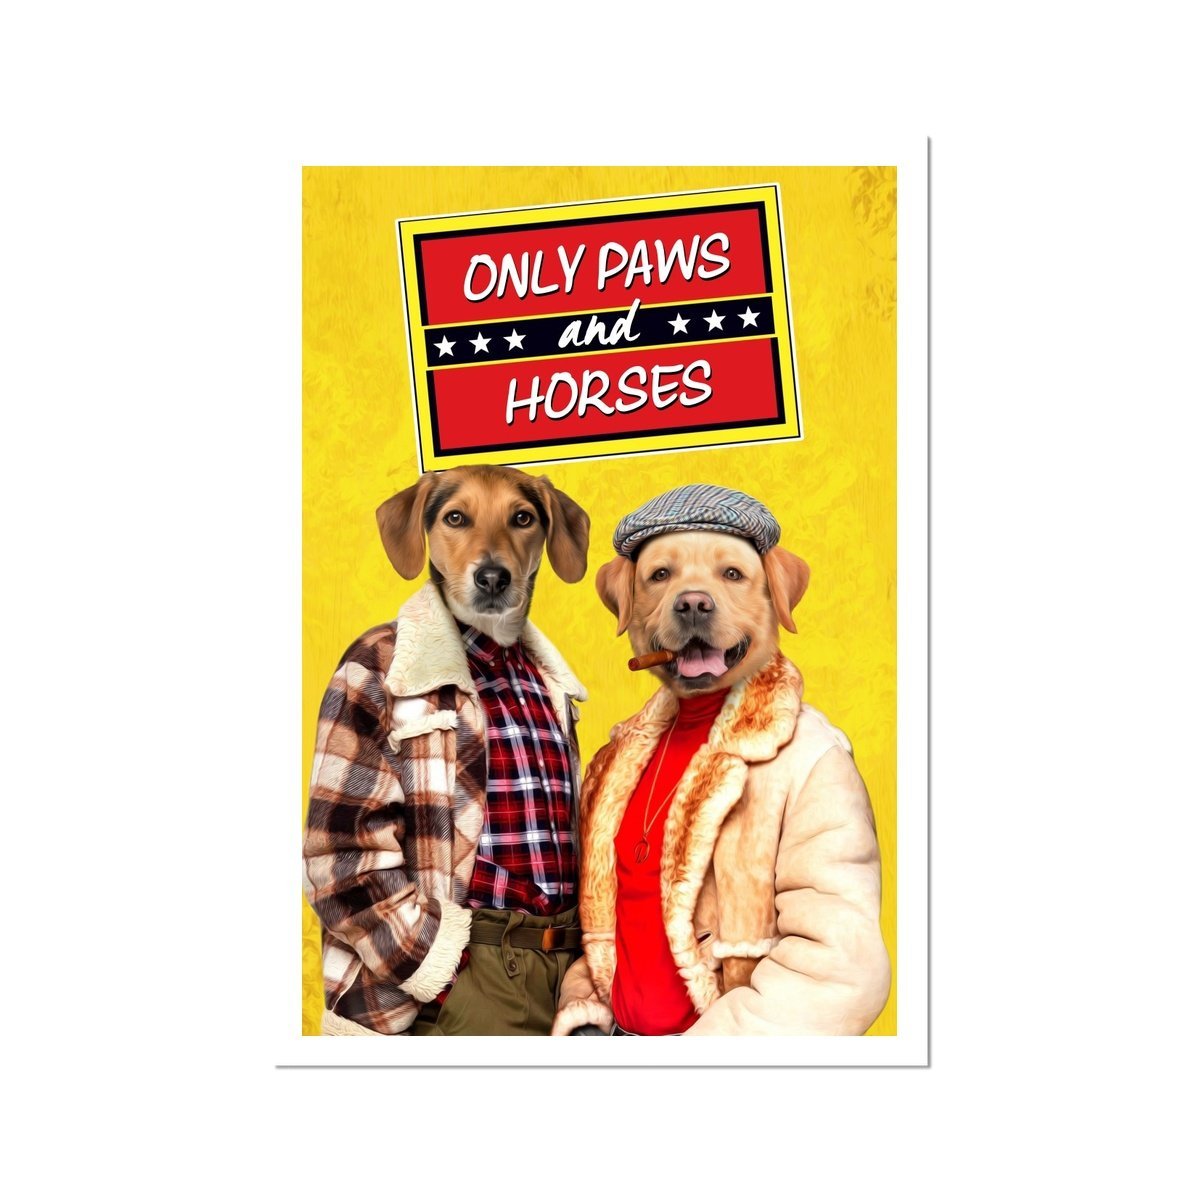 Only Paws & Horses: Custom 2 Pet Poster - Paw & Glory - #pet portraits# - #dog portraits# - #pet portraits uk#Paw & Glory, pawandglory, paw portraits, minimal dog art, paintings of pets from photos, painting of your dog, dog portrait images, pet portraits